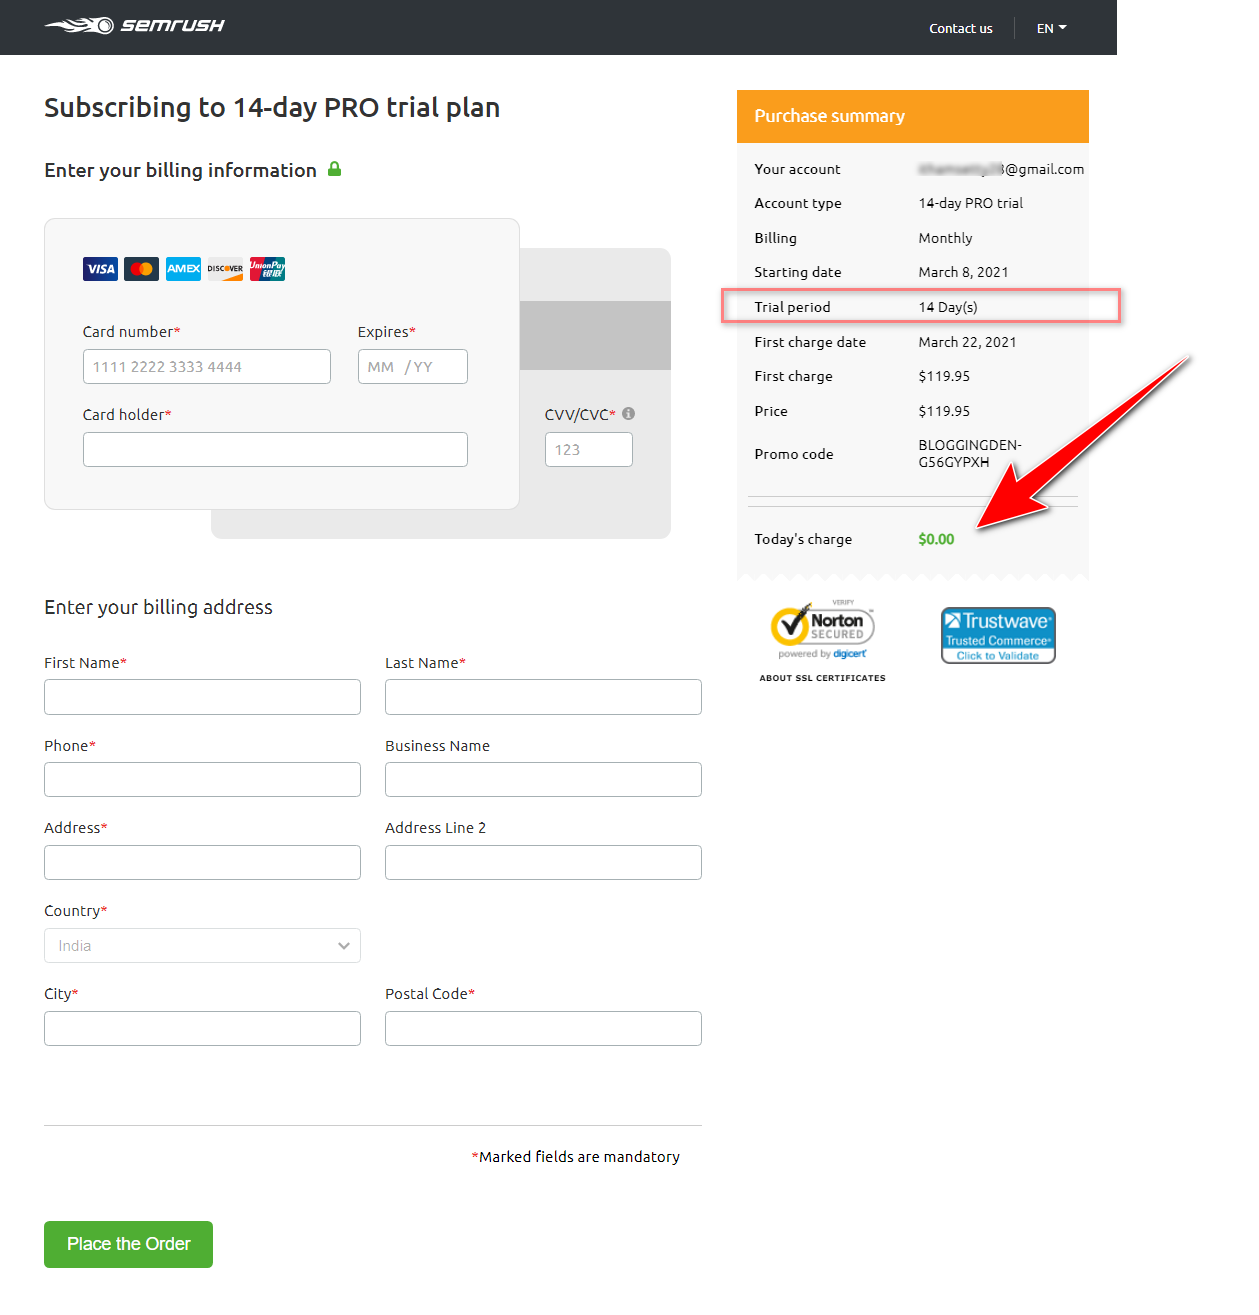 How can I change my email id in Semrush?